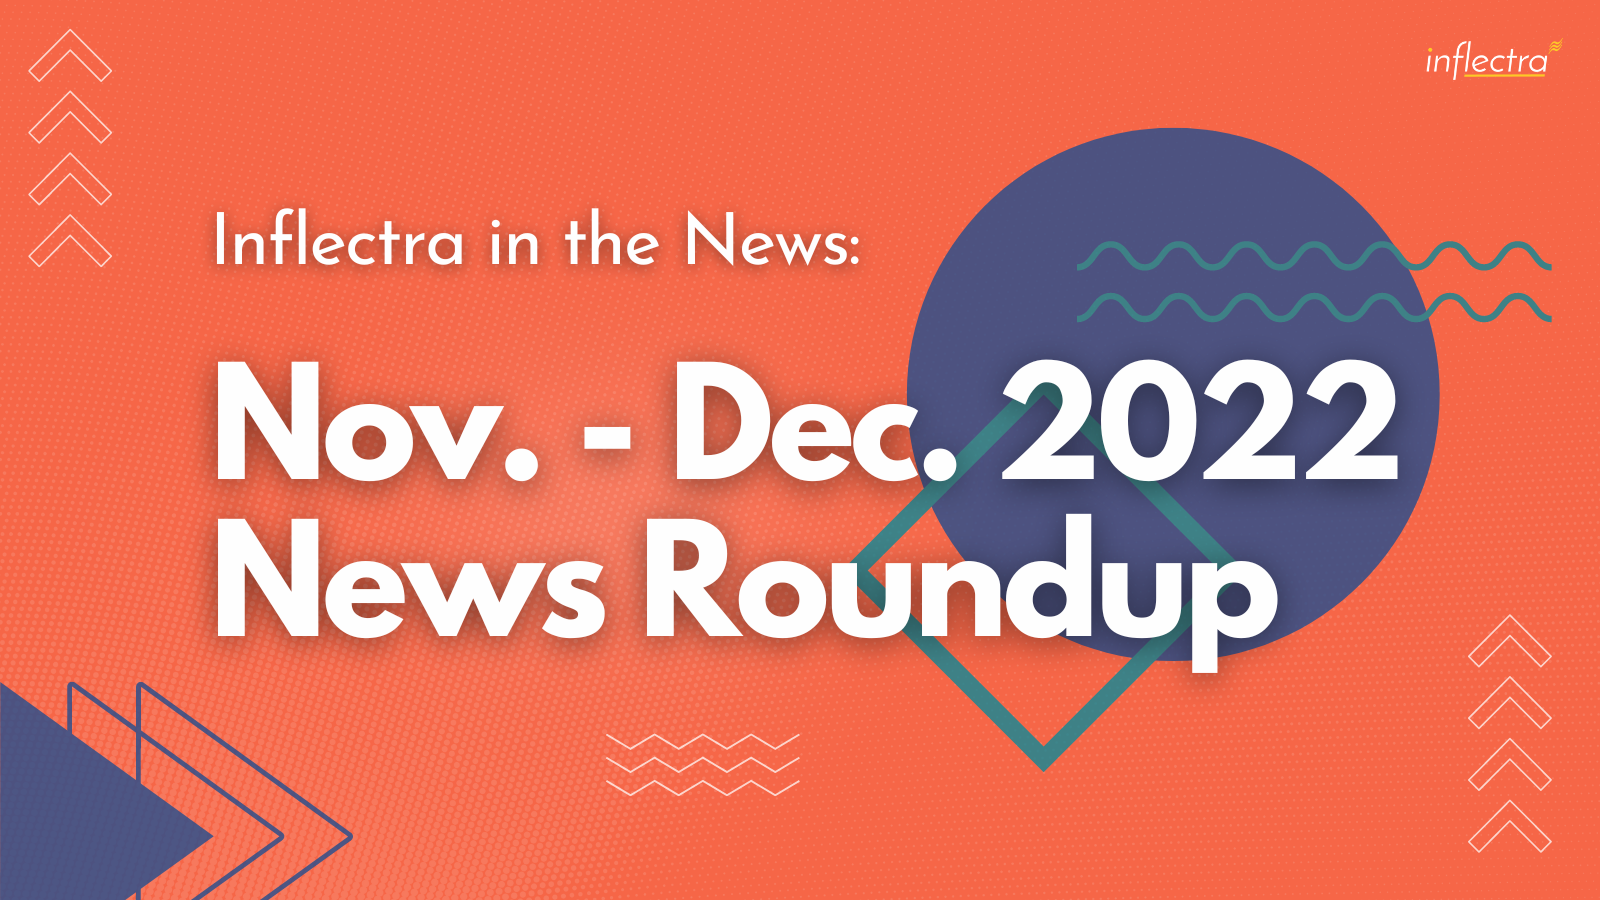 inflectra-in-the-news-november-december-roundup-image